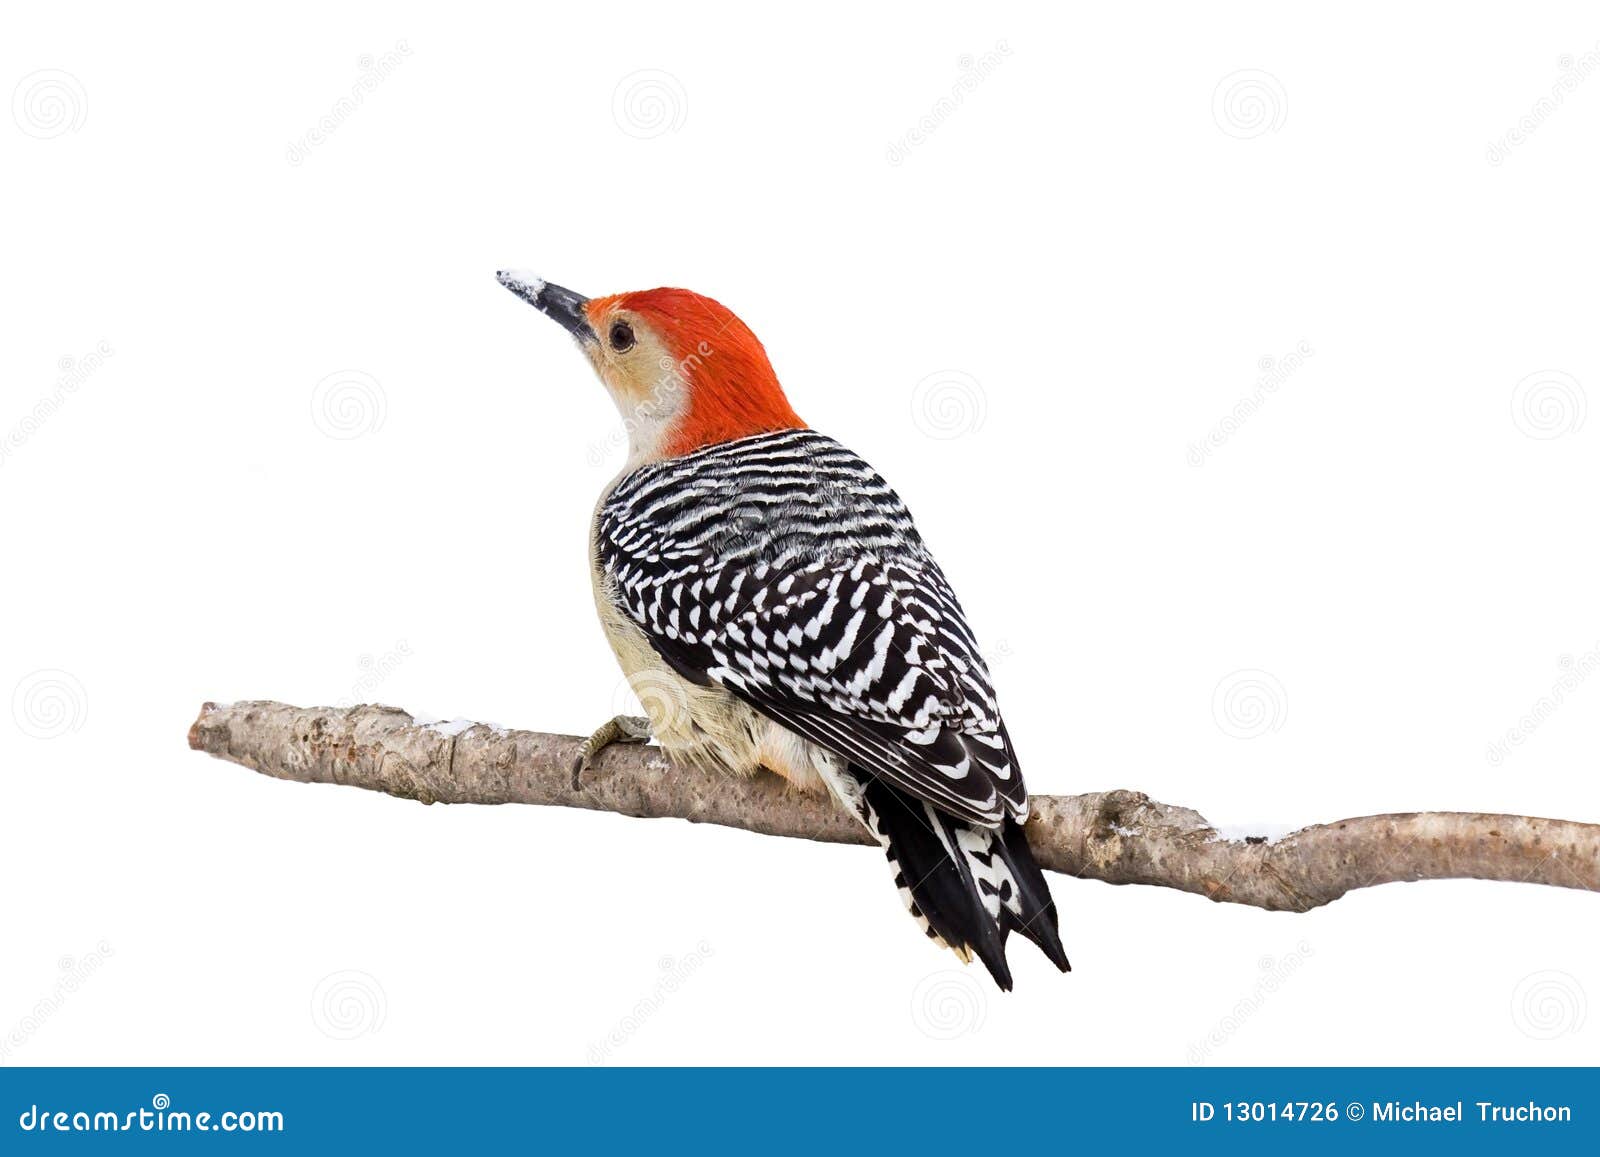 red-bellied woodpecker with a snow covered beak